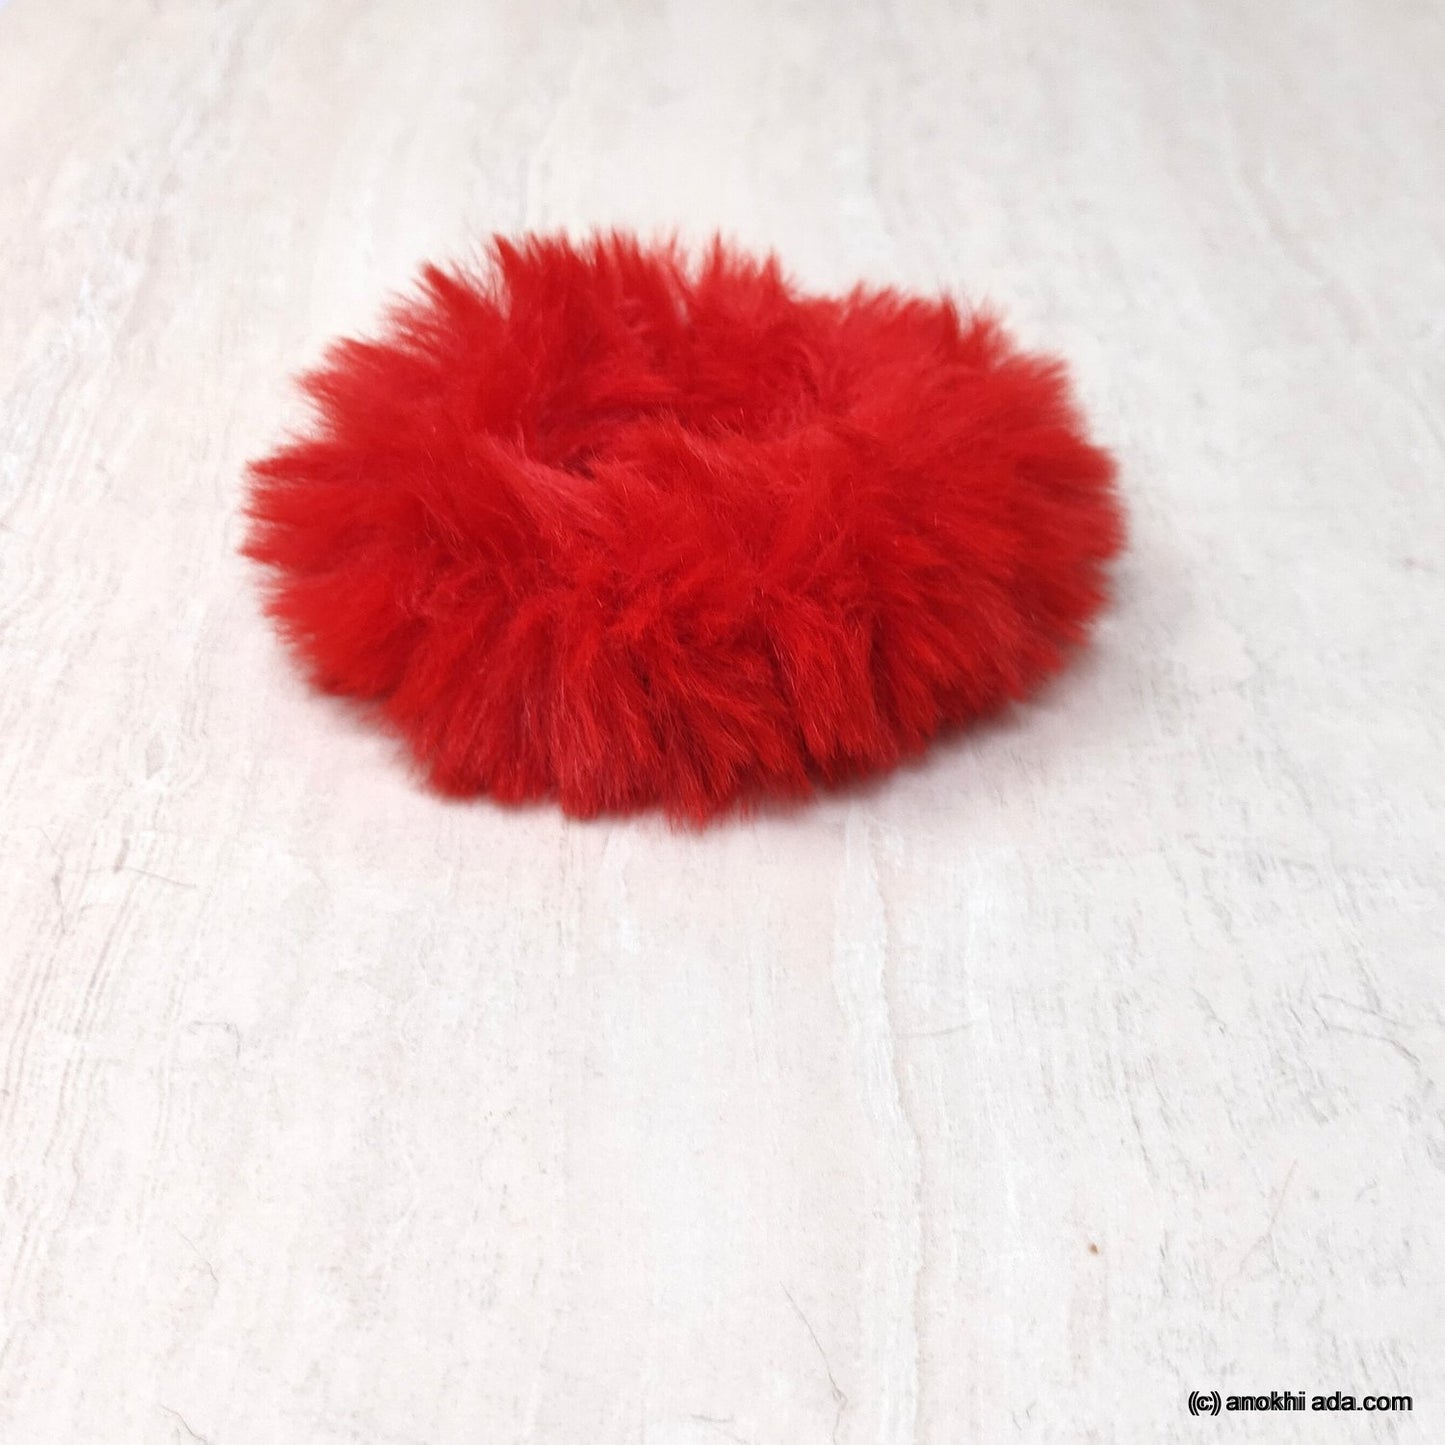 Anokhi Ada Large Size Red Fur Scrunchie for Girls and Women (ZG-44 Scrunchie)